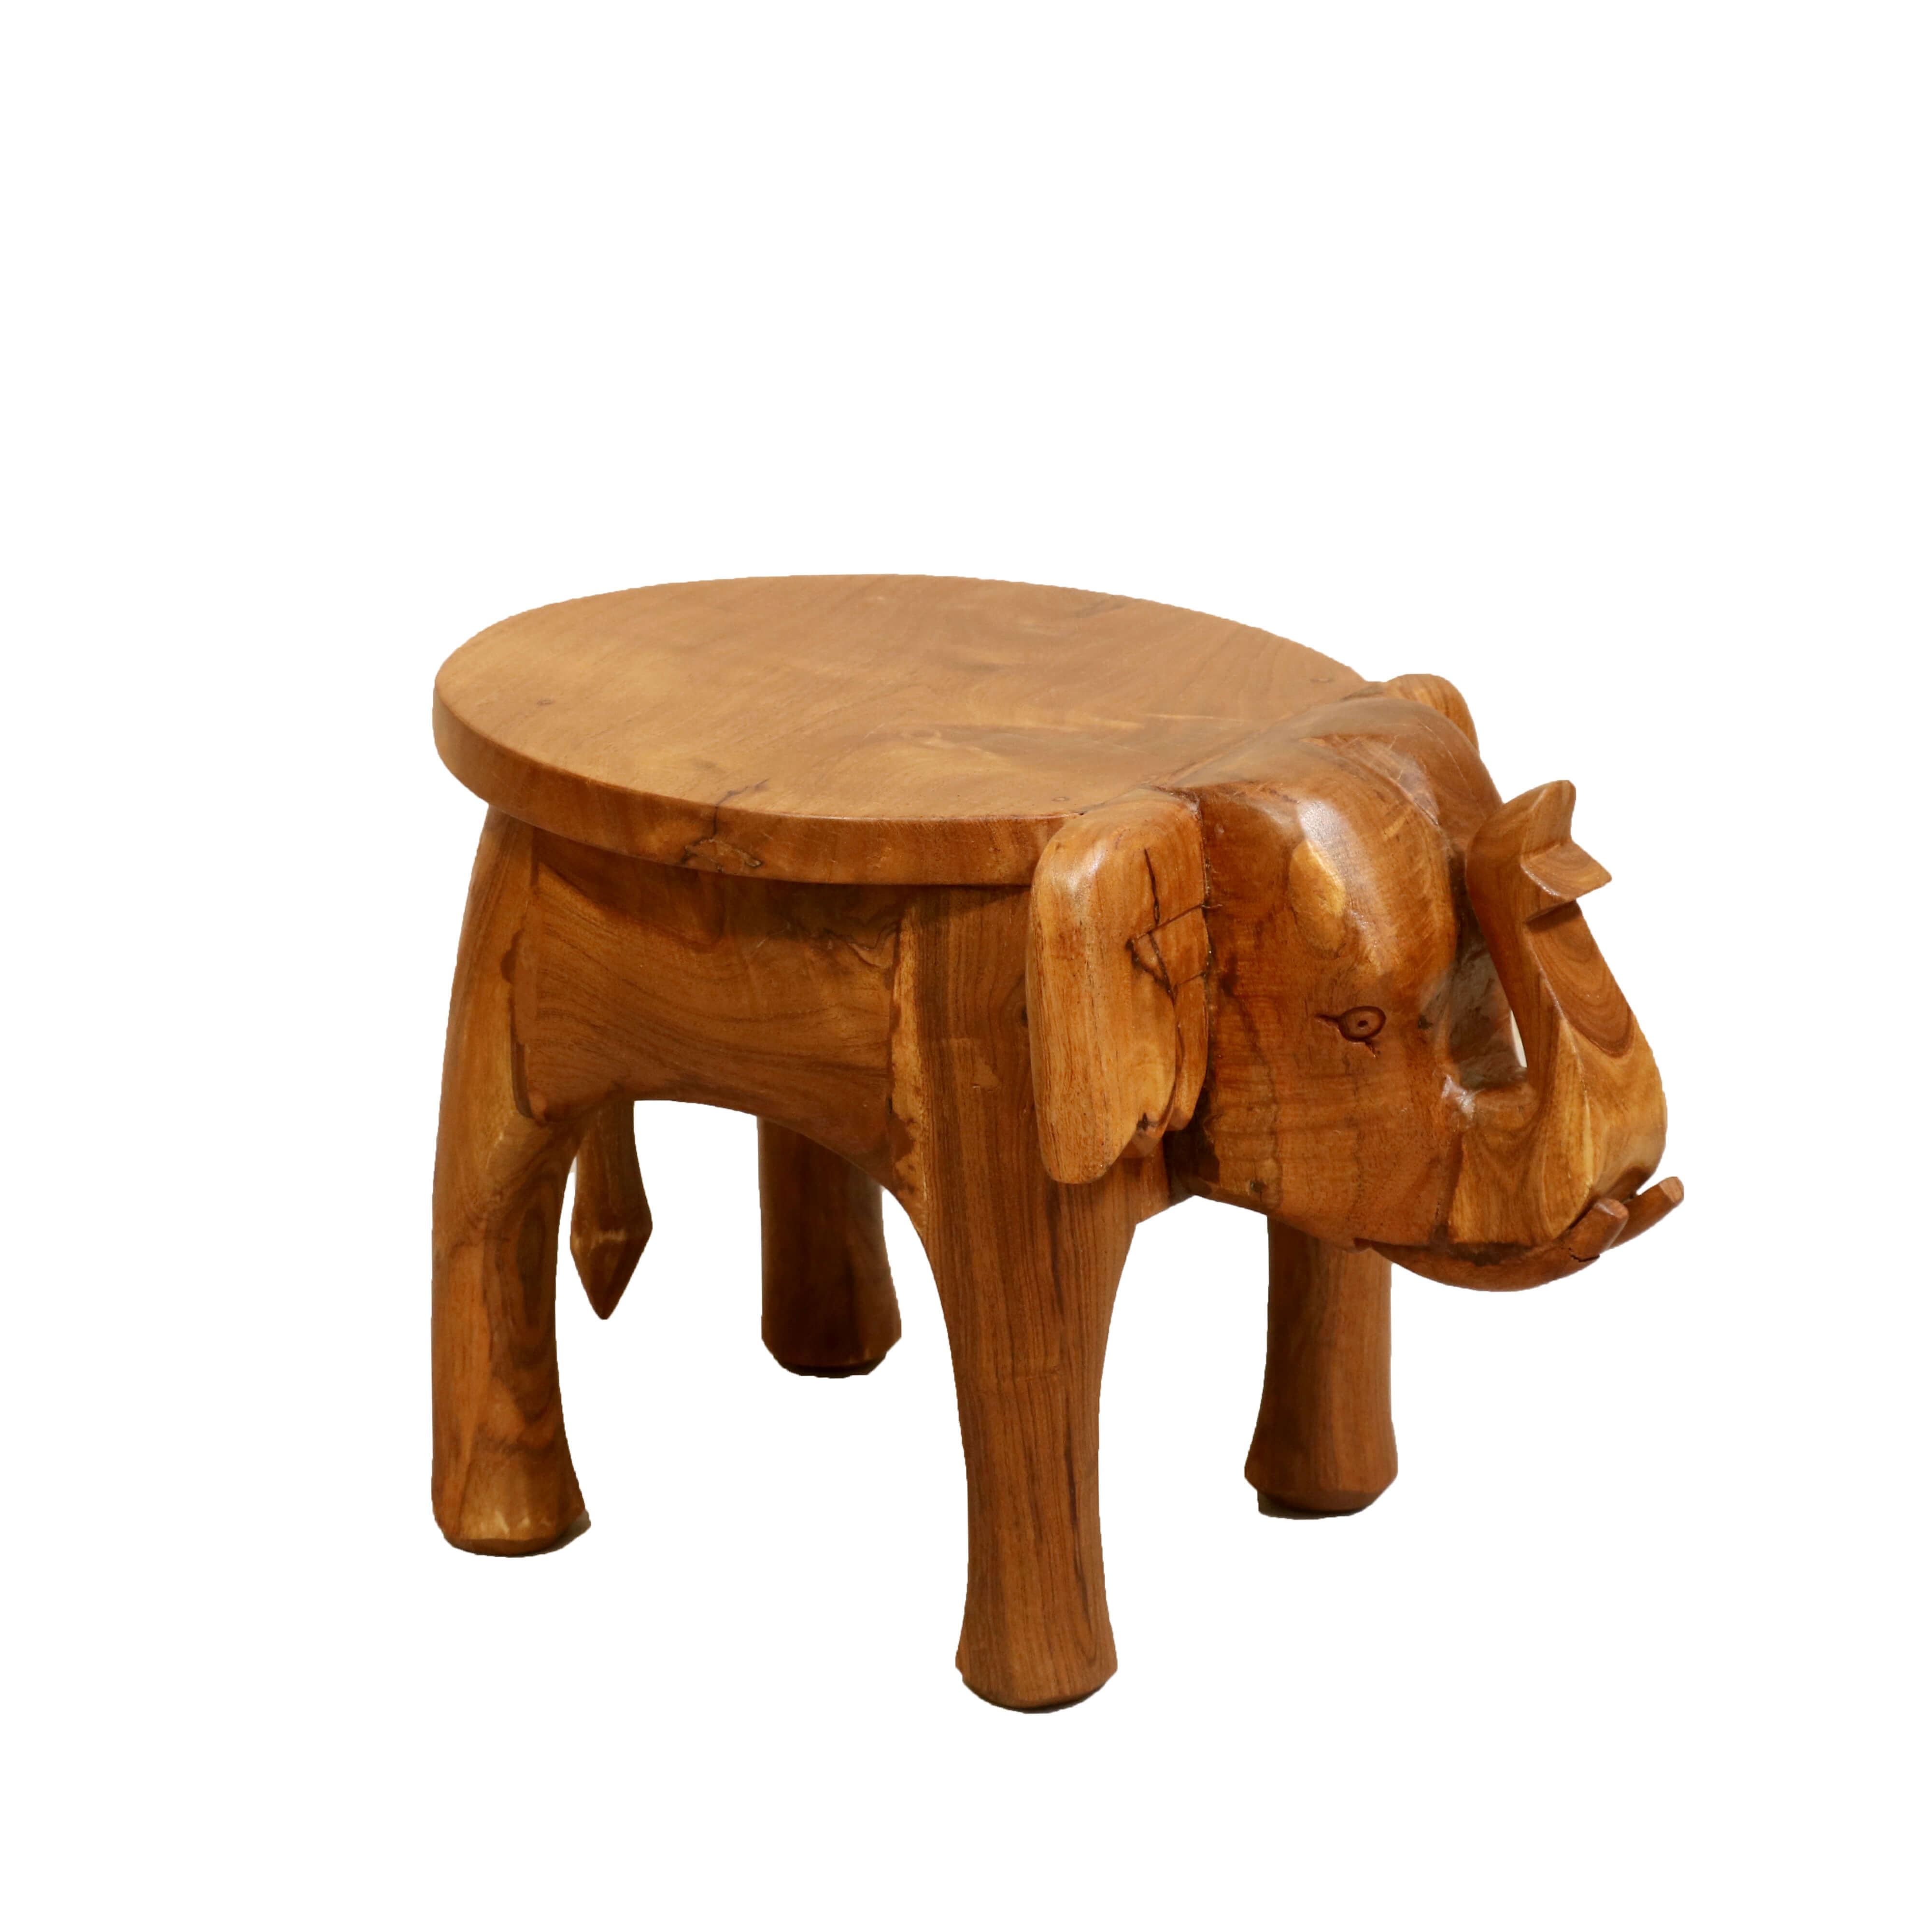 Wooden Tone Elephant Table Stand Extra Small (6 x 9 x 6 Inch) Animal Figurine